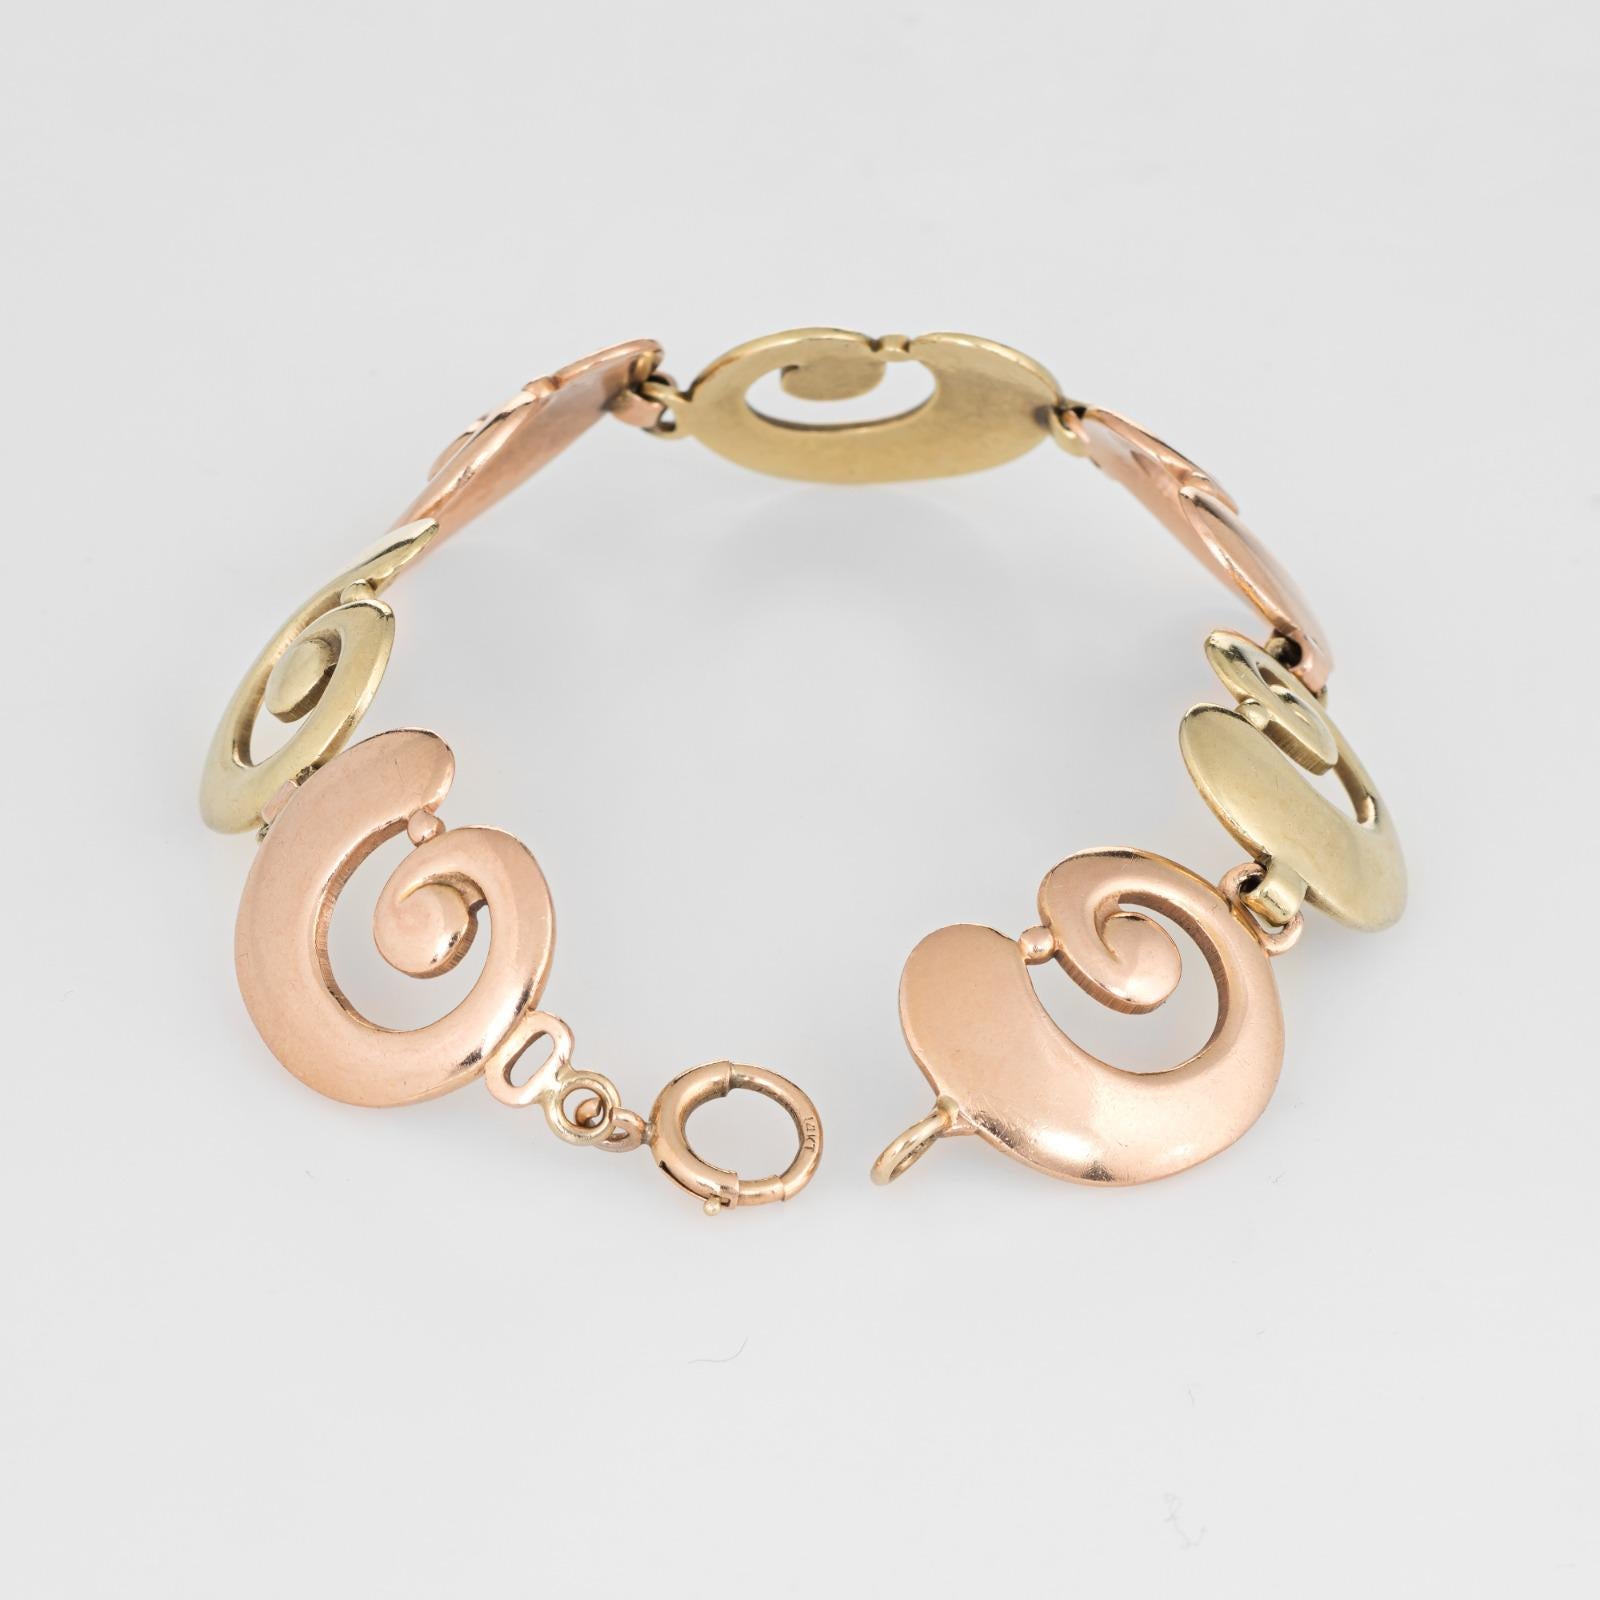 Stylish vintage Tiffany & Co bracelet crafted in 14k rose & yellow gold. 

'Swirl' style links (also resembles a snail shell) alternate in rose and yellow gold. The 17mm wide links (0.66 inches) make a great statement on the wrist.

The bracelet is